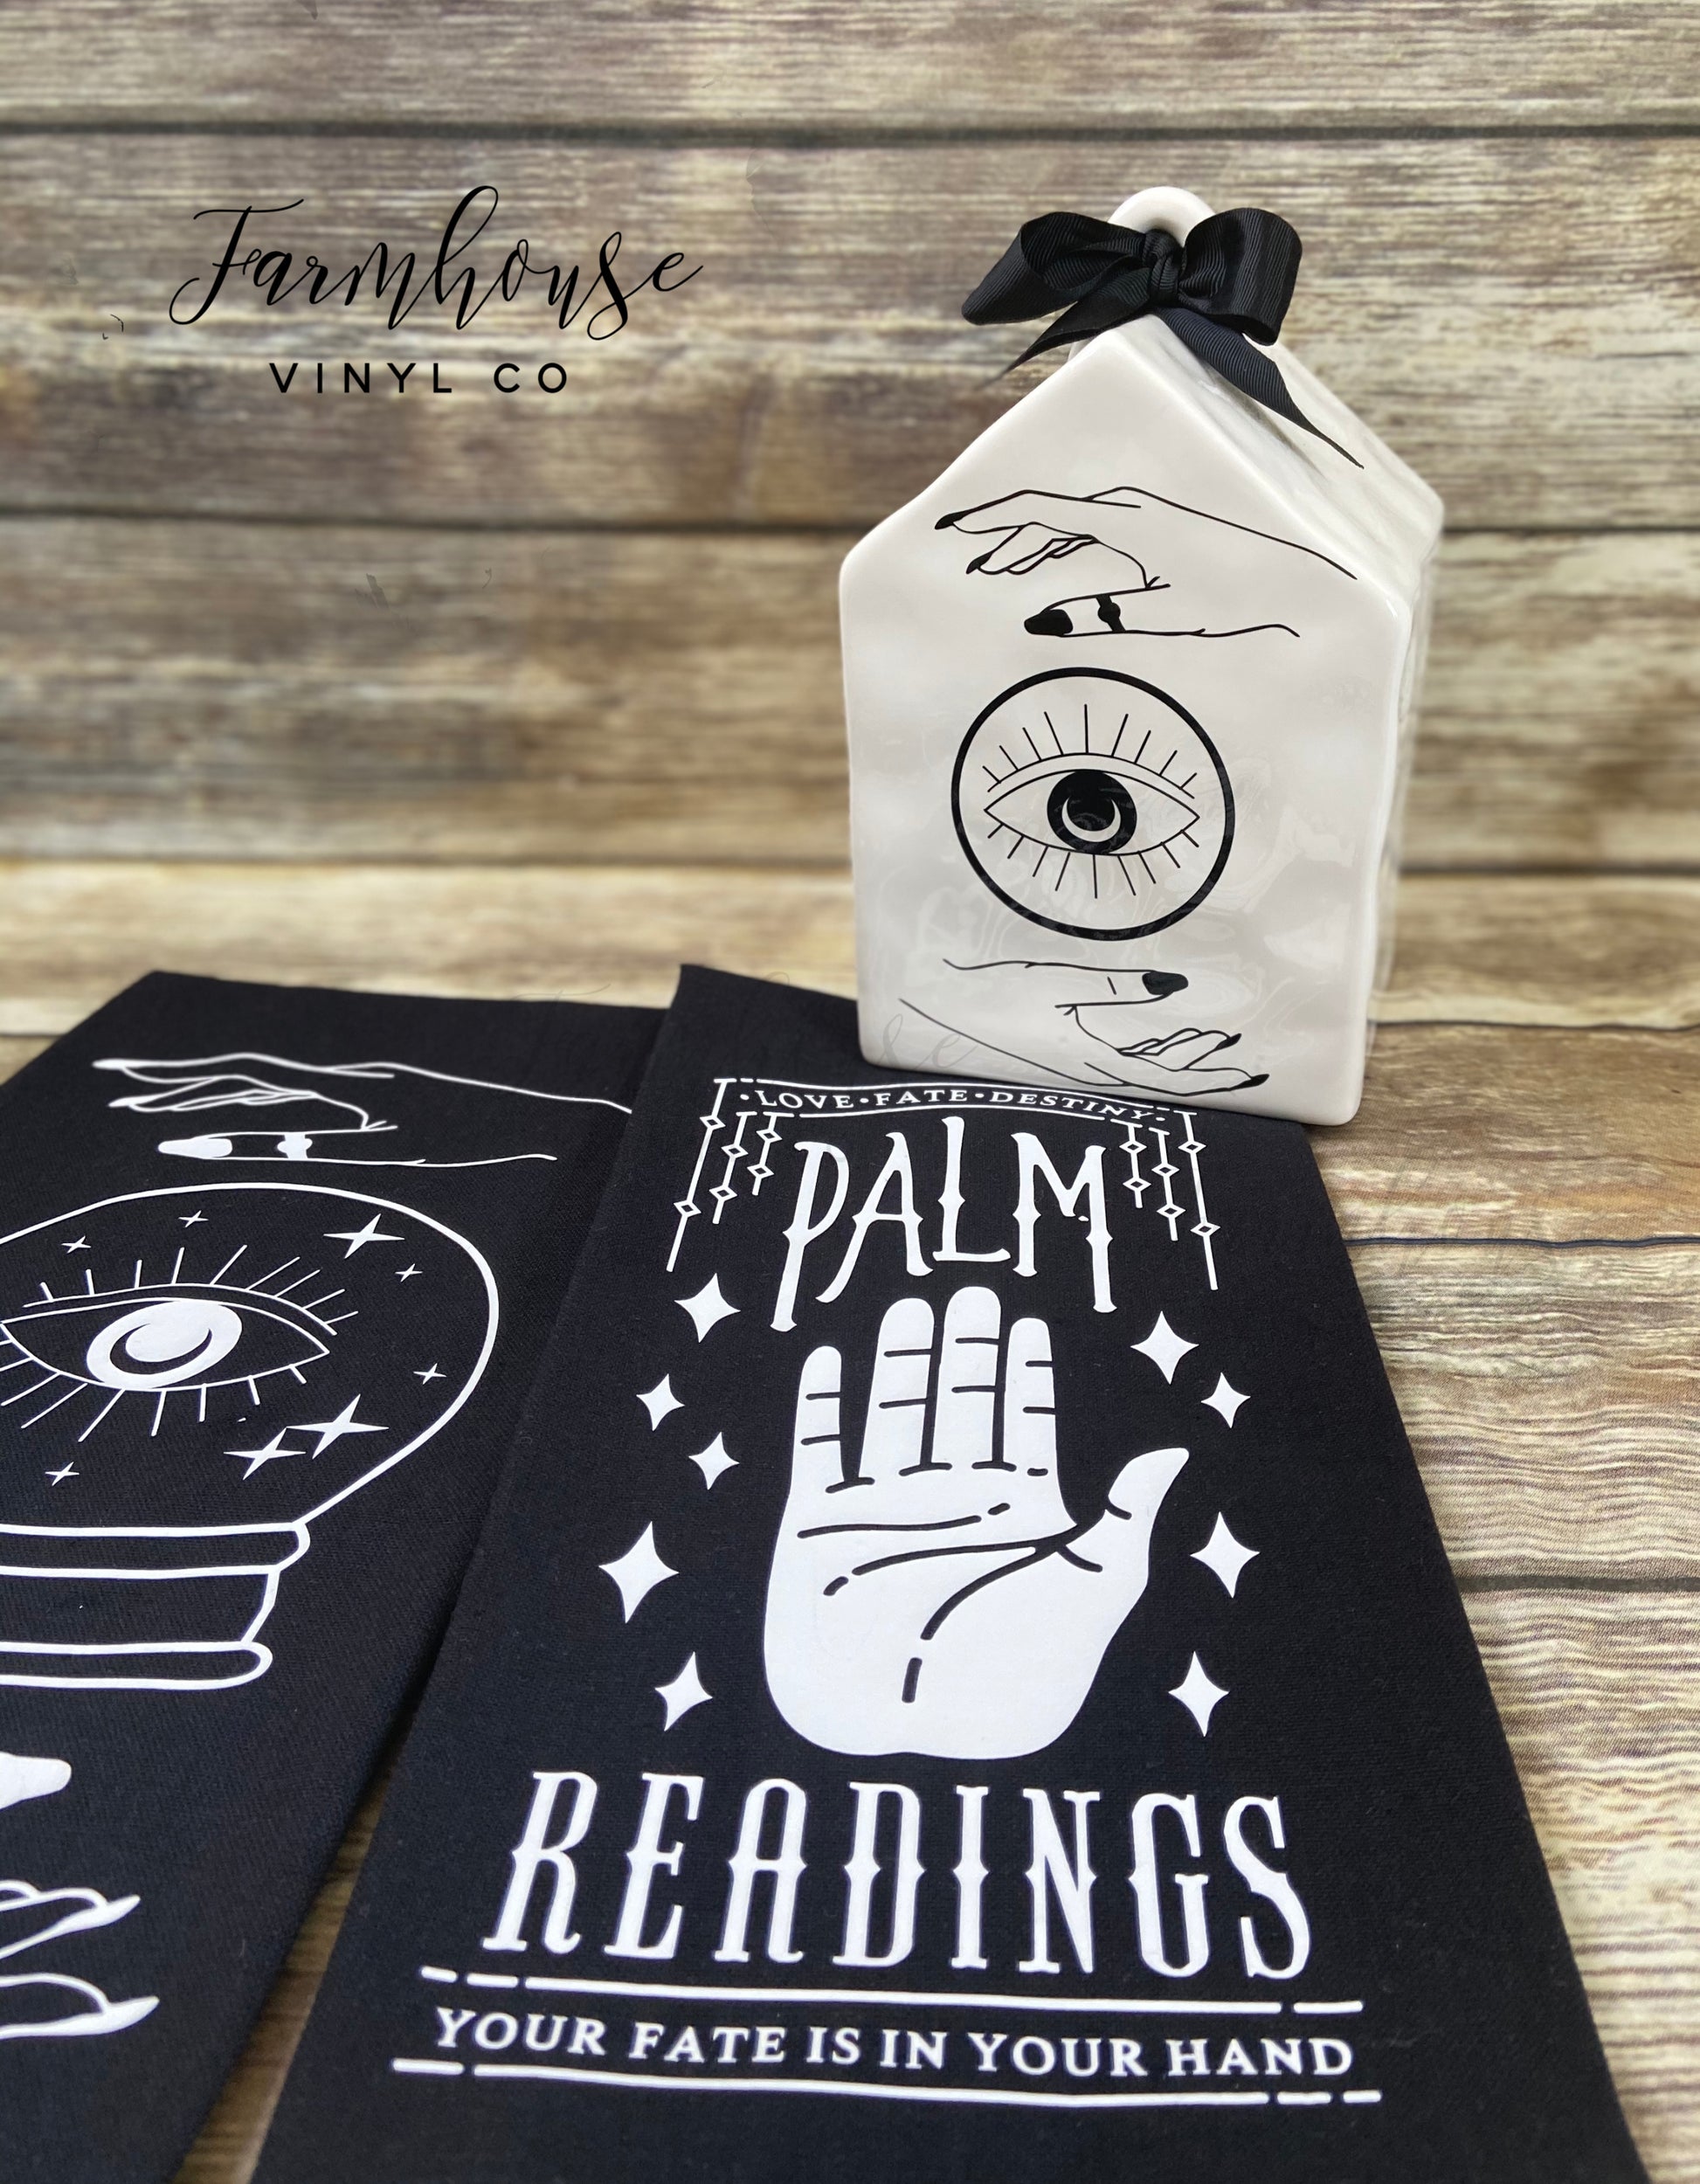 Crystal Ball and Palm Reading Towels - Farmhouse Vinyl Co